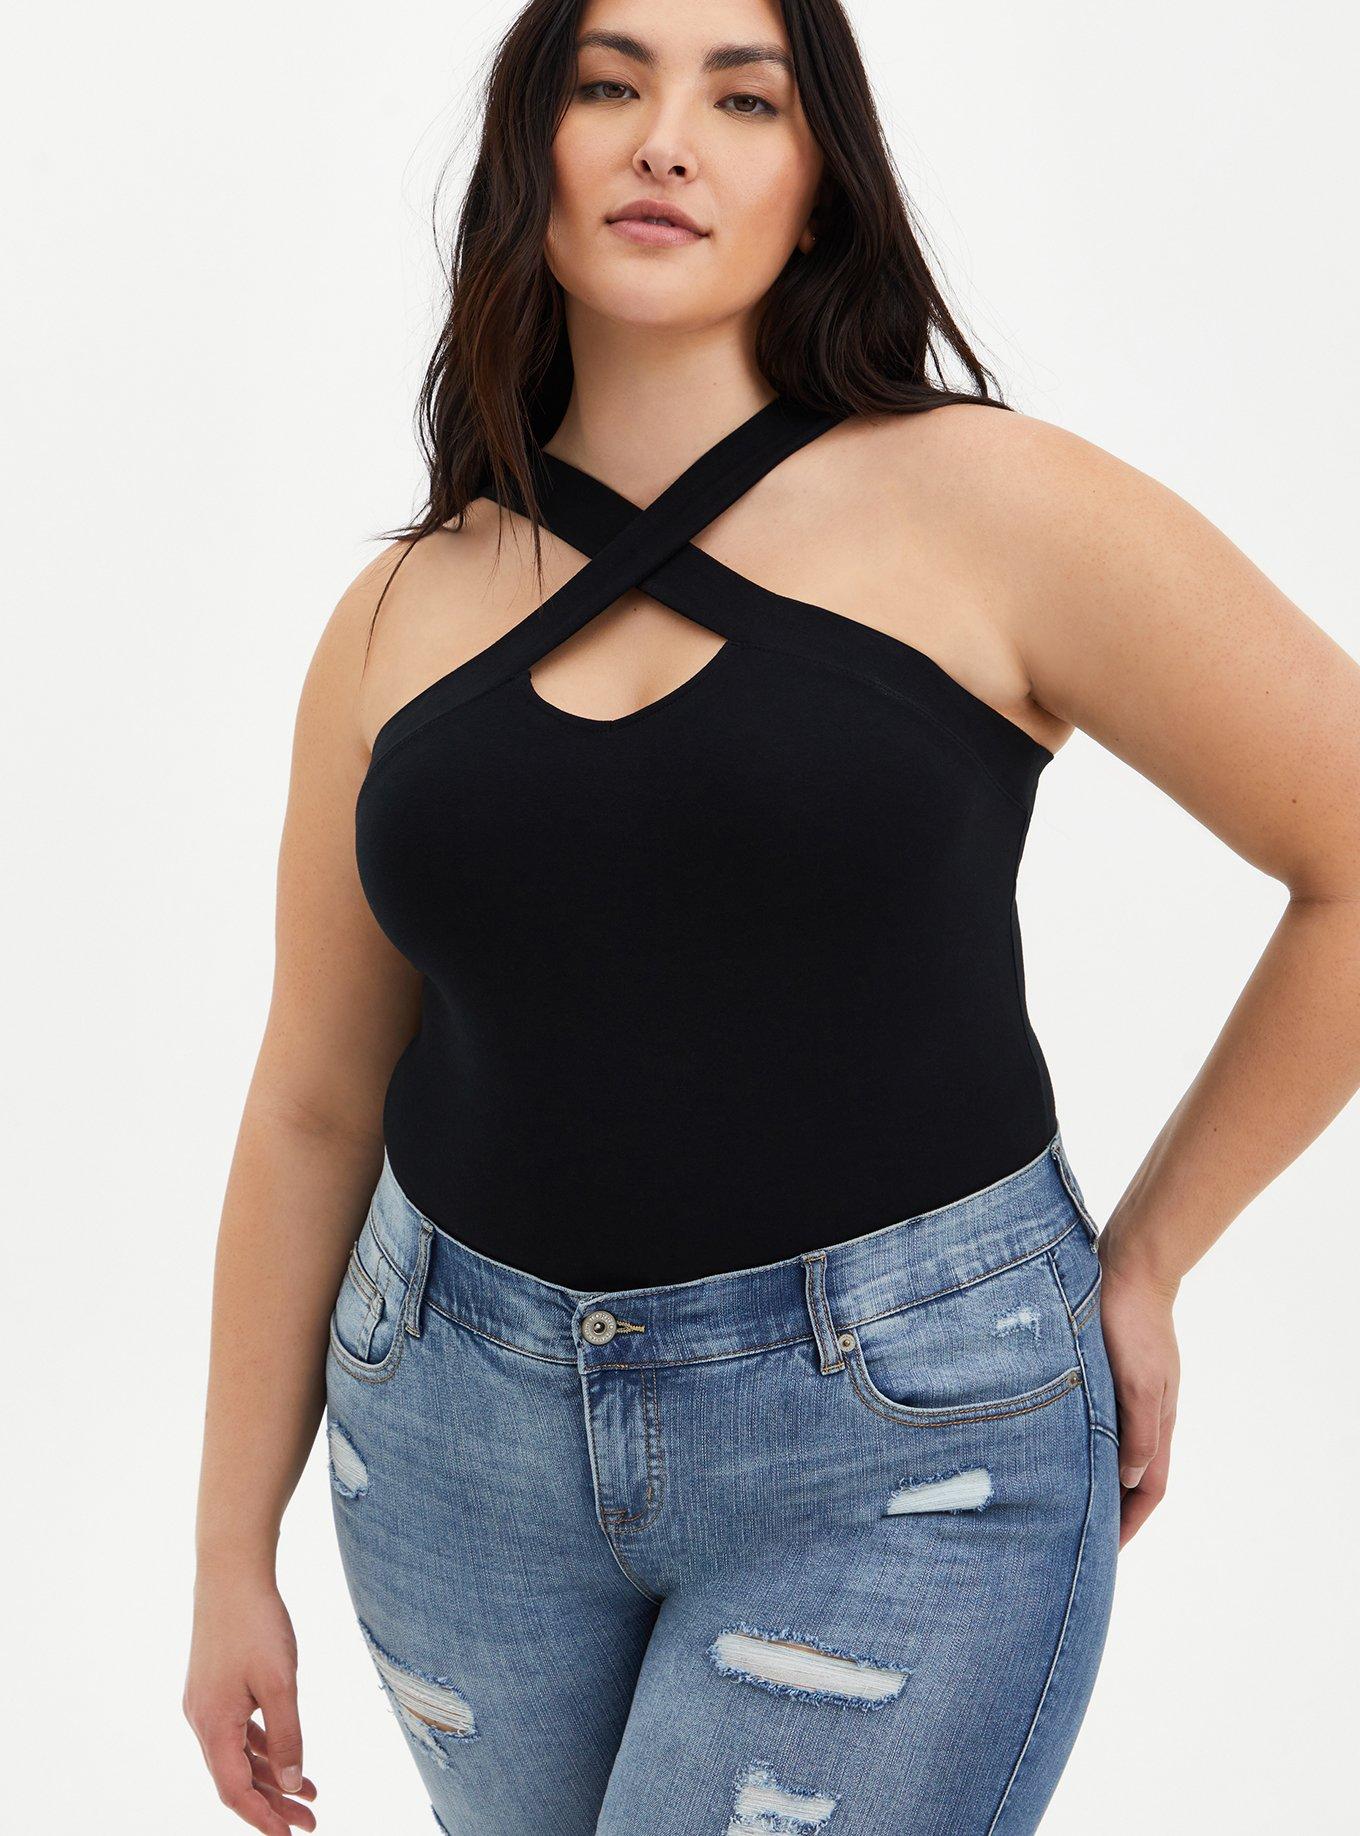 Buy lucky brand plus size tops 3x NWT Online Bahrain